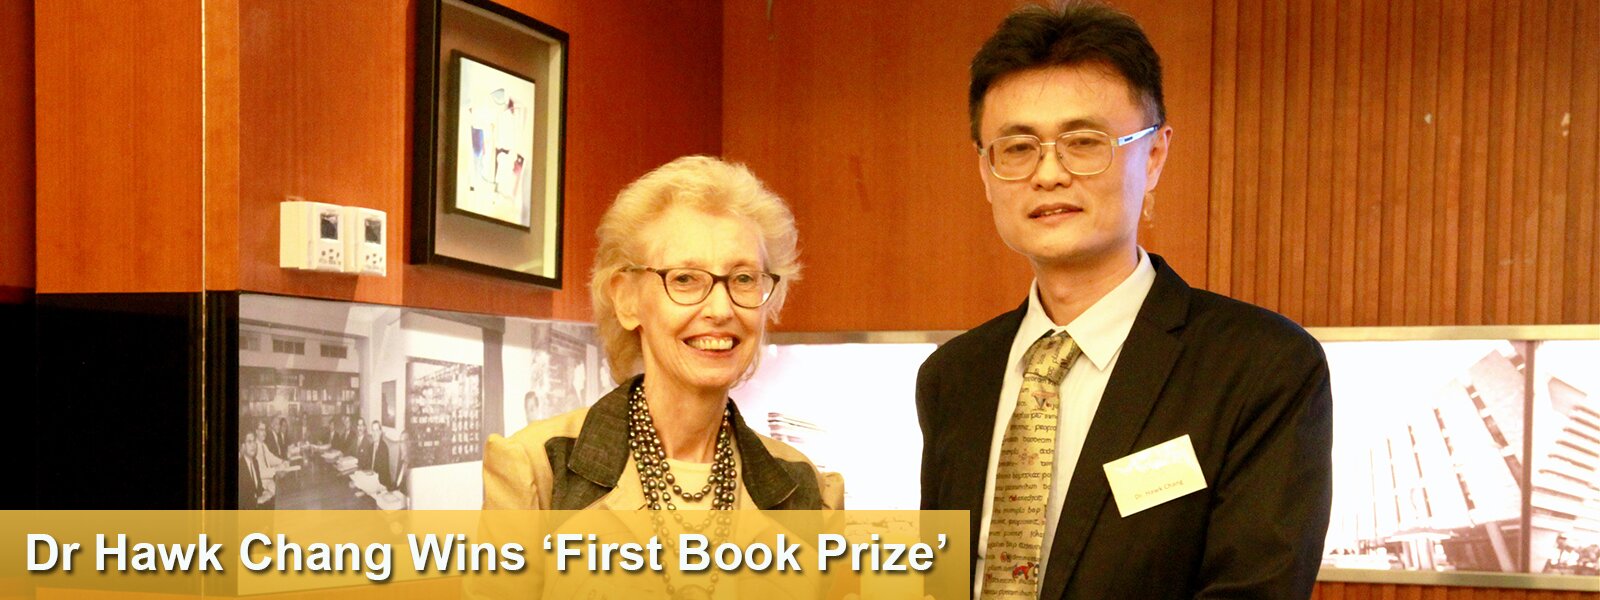 Dr Hawk Chang Wins ‘First Book Prize’